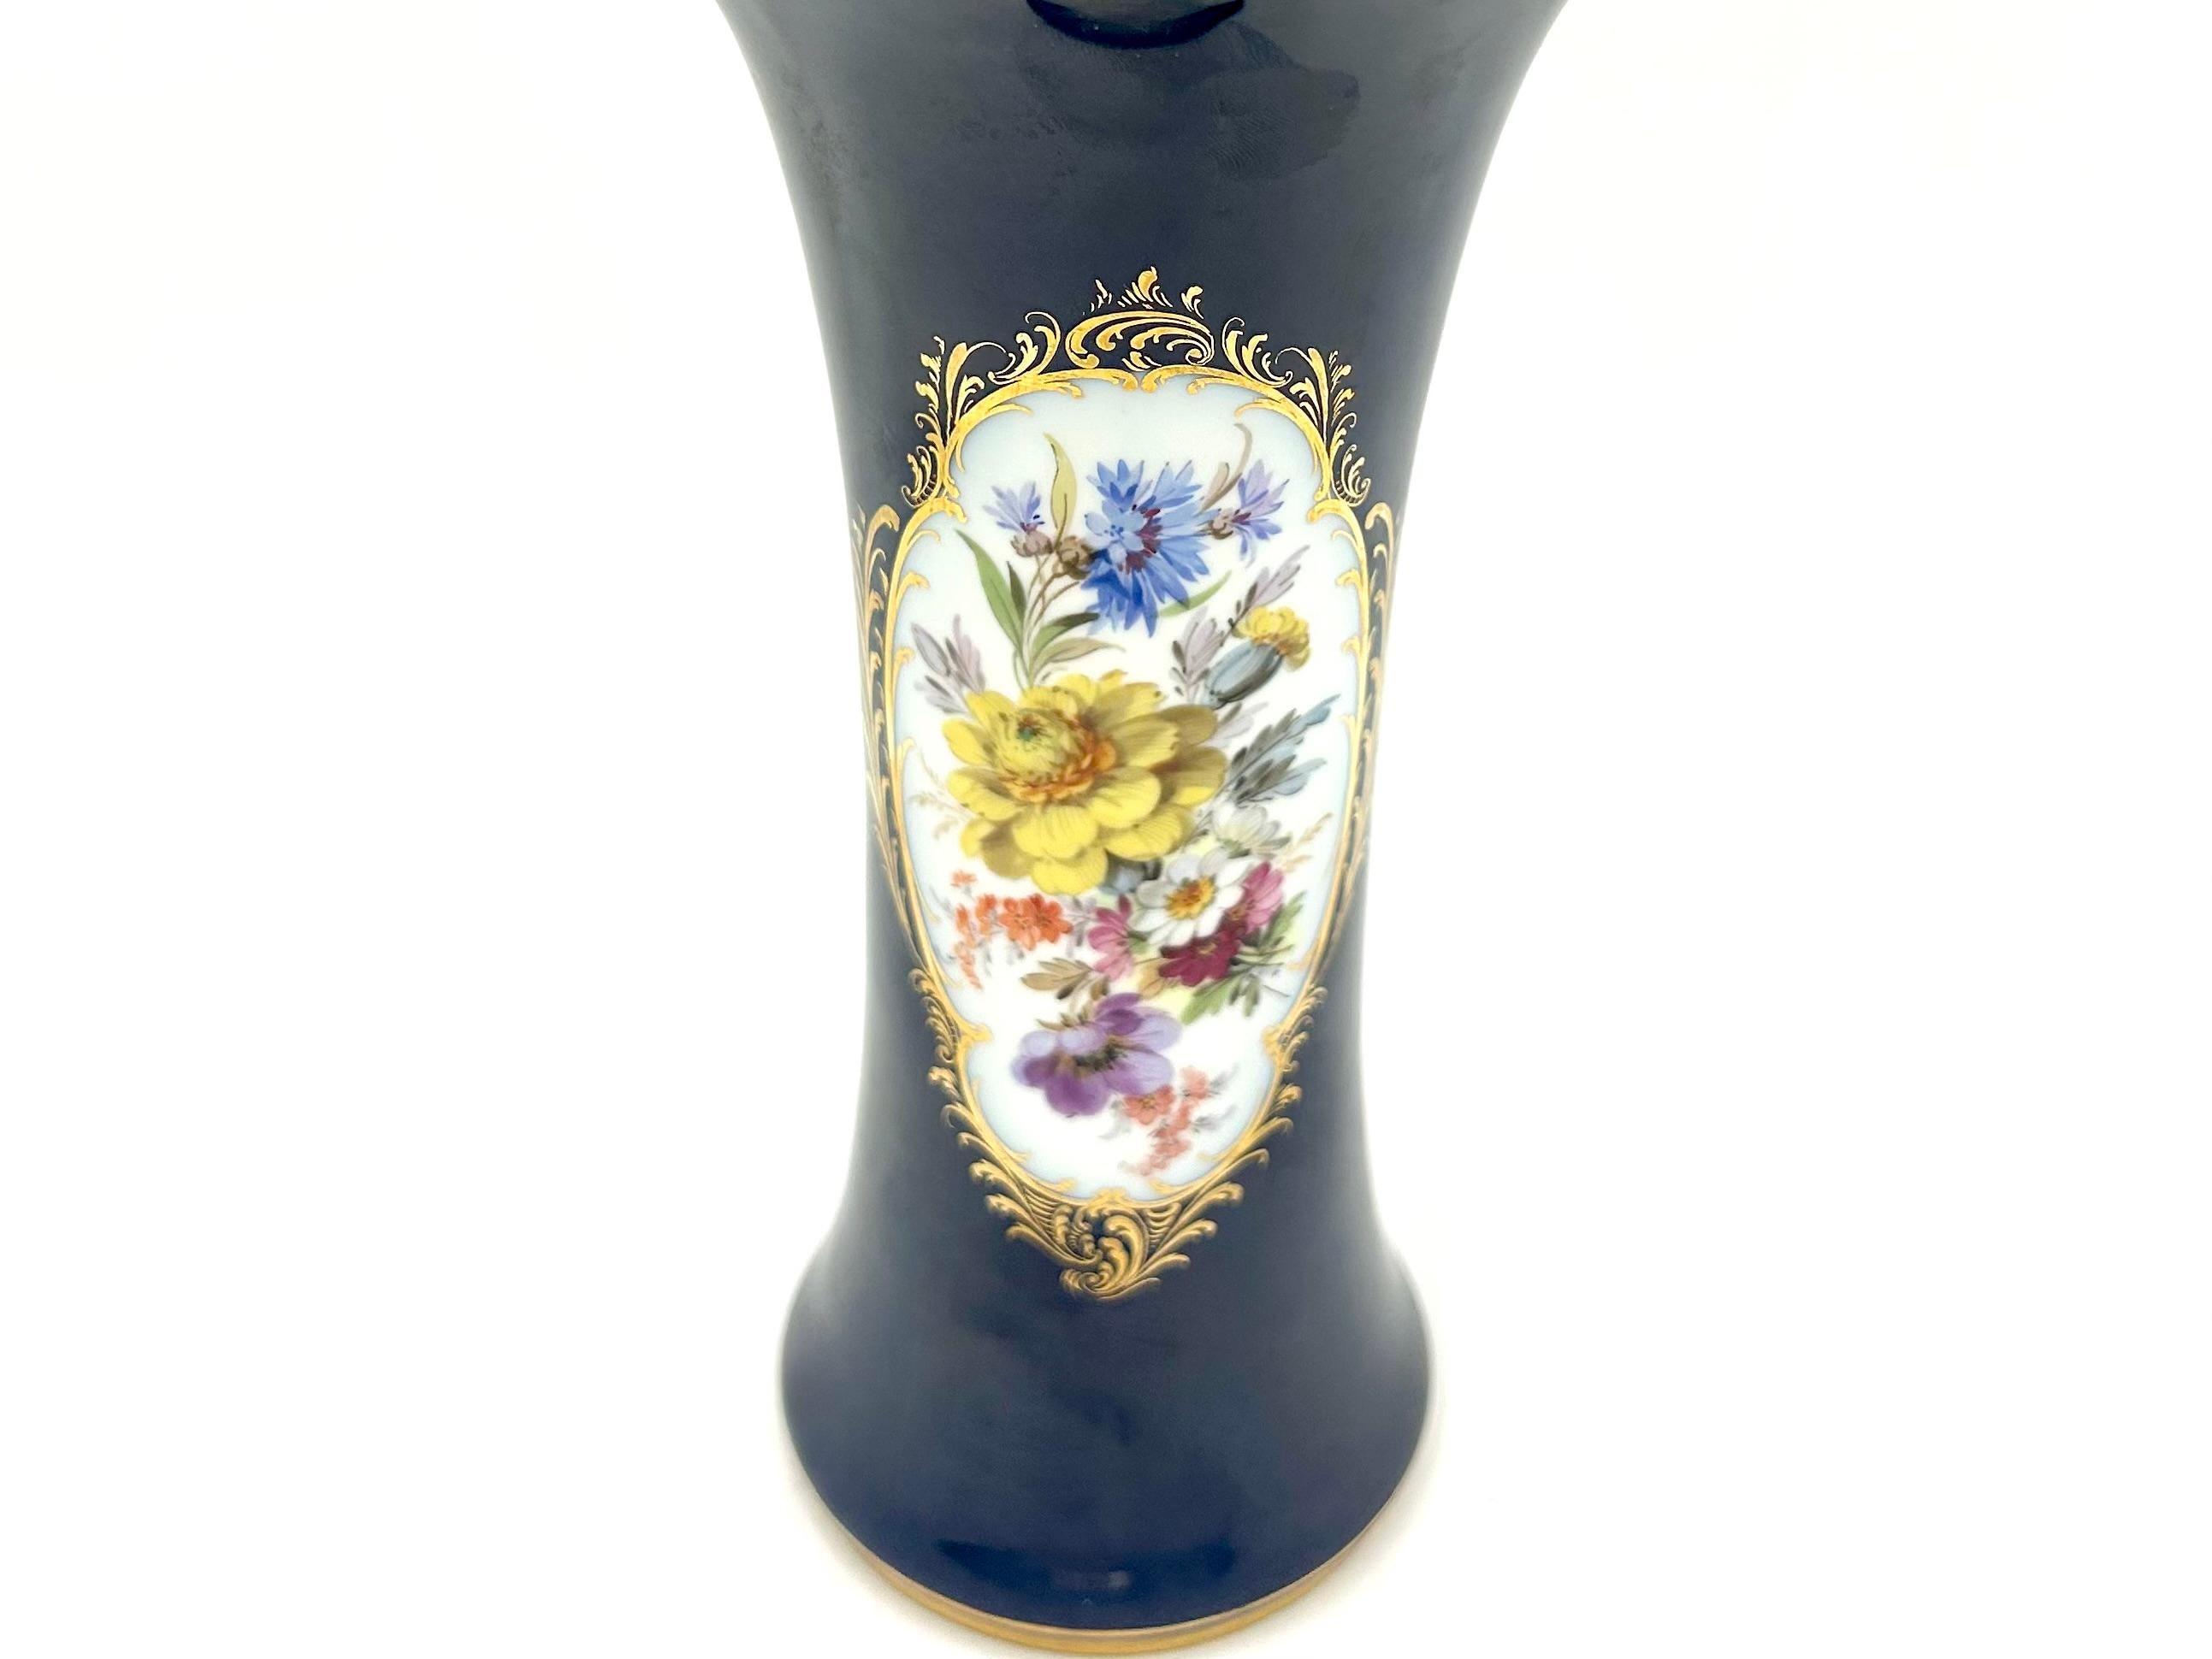 A cobalt vase produced by the excellent German factory Meissen.
White porcelain decorated with a floral motif on a cobalt background and gilding on the edge of the mouth.
The vase was produced around 1964. 
Very good condition without